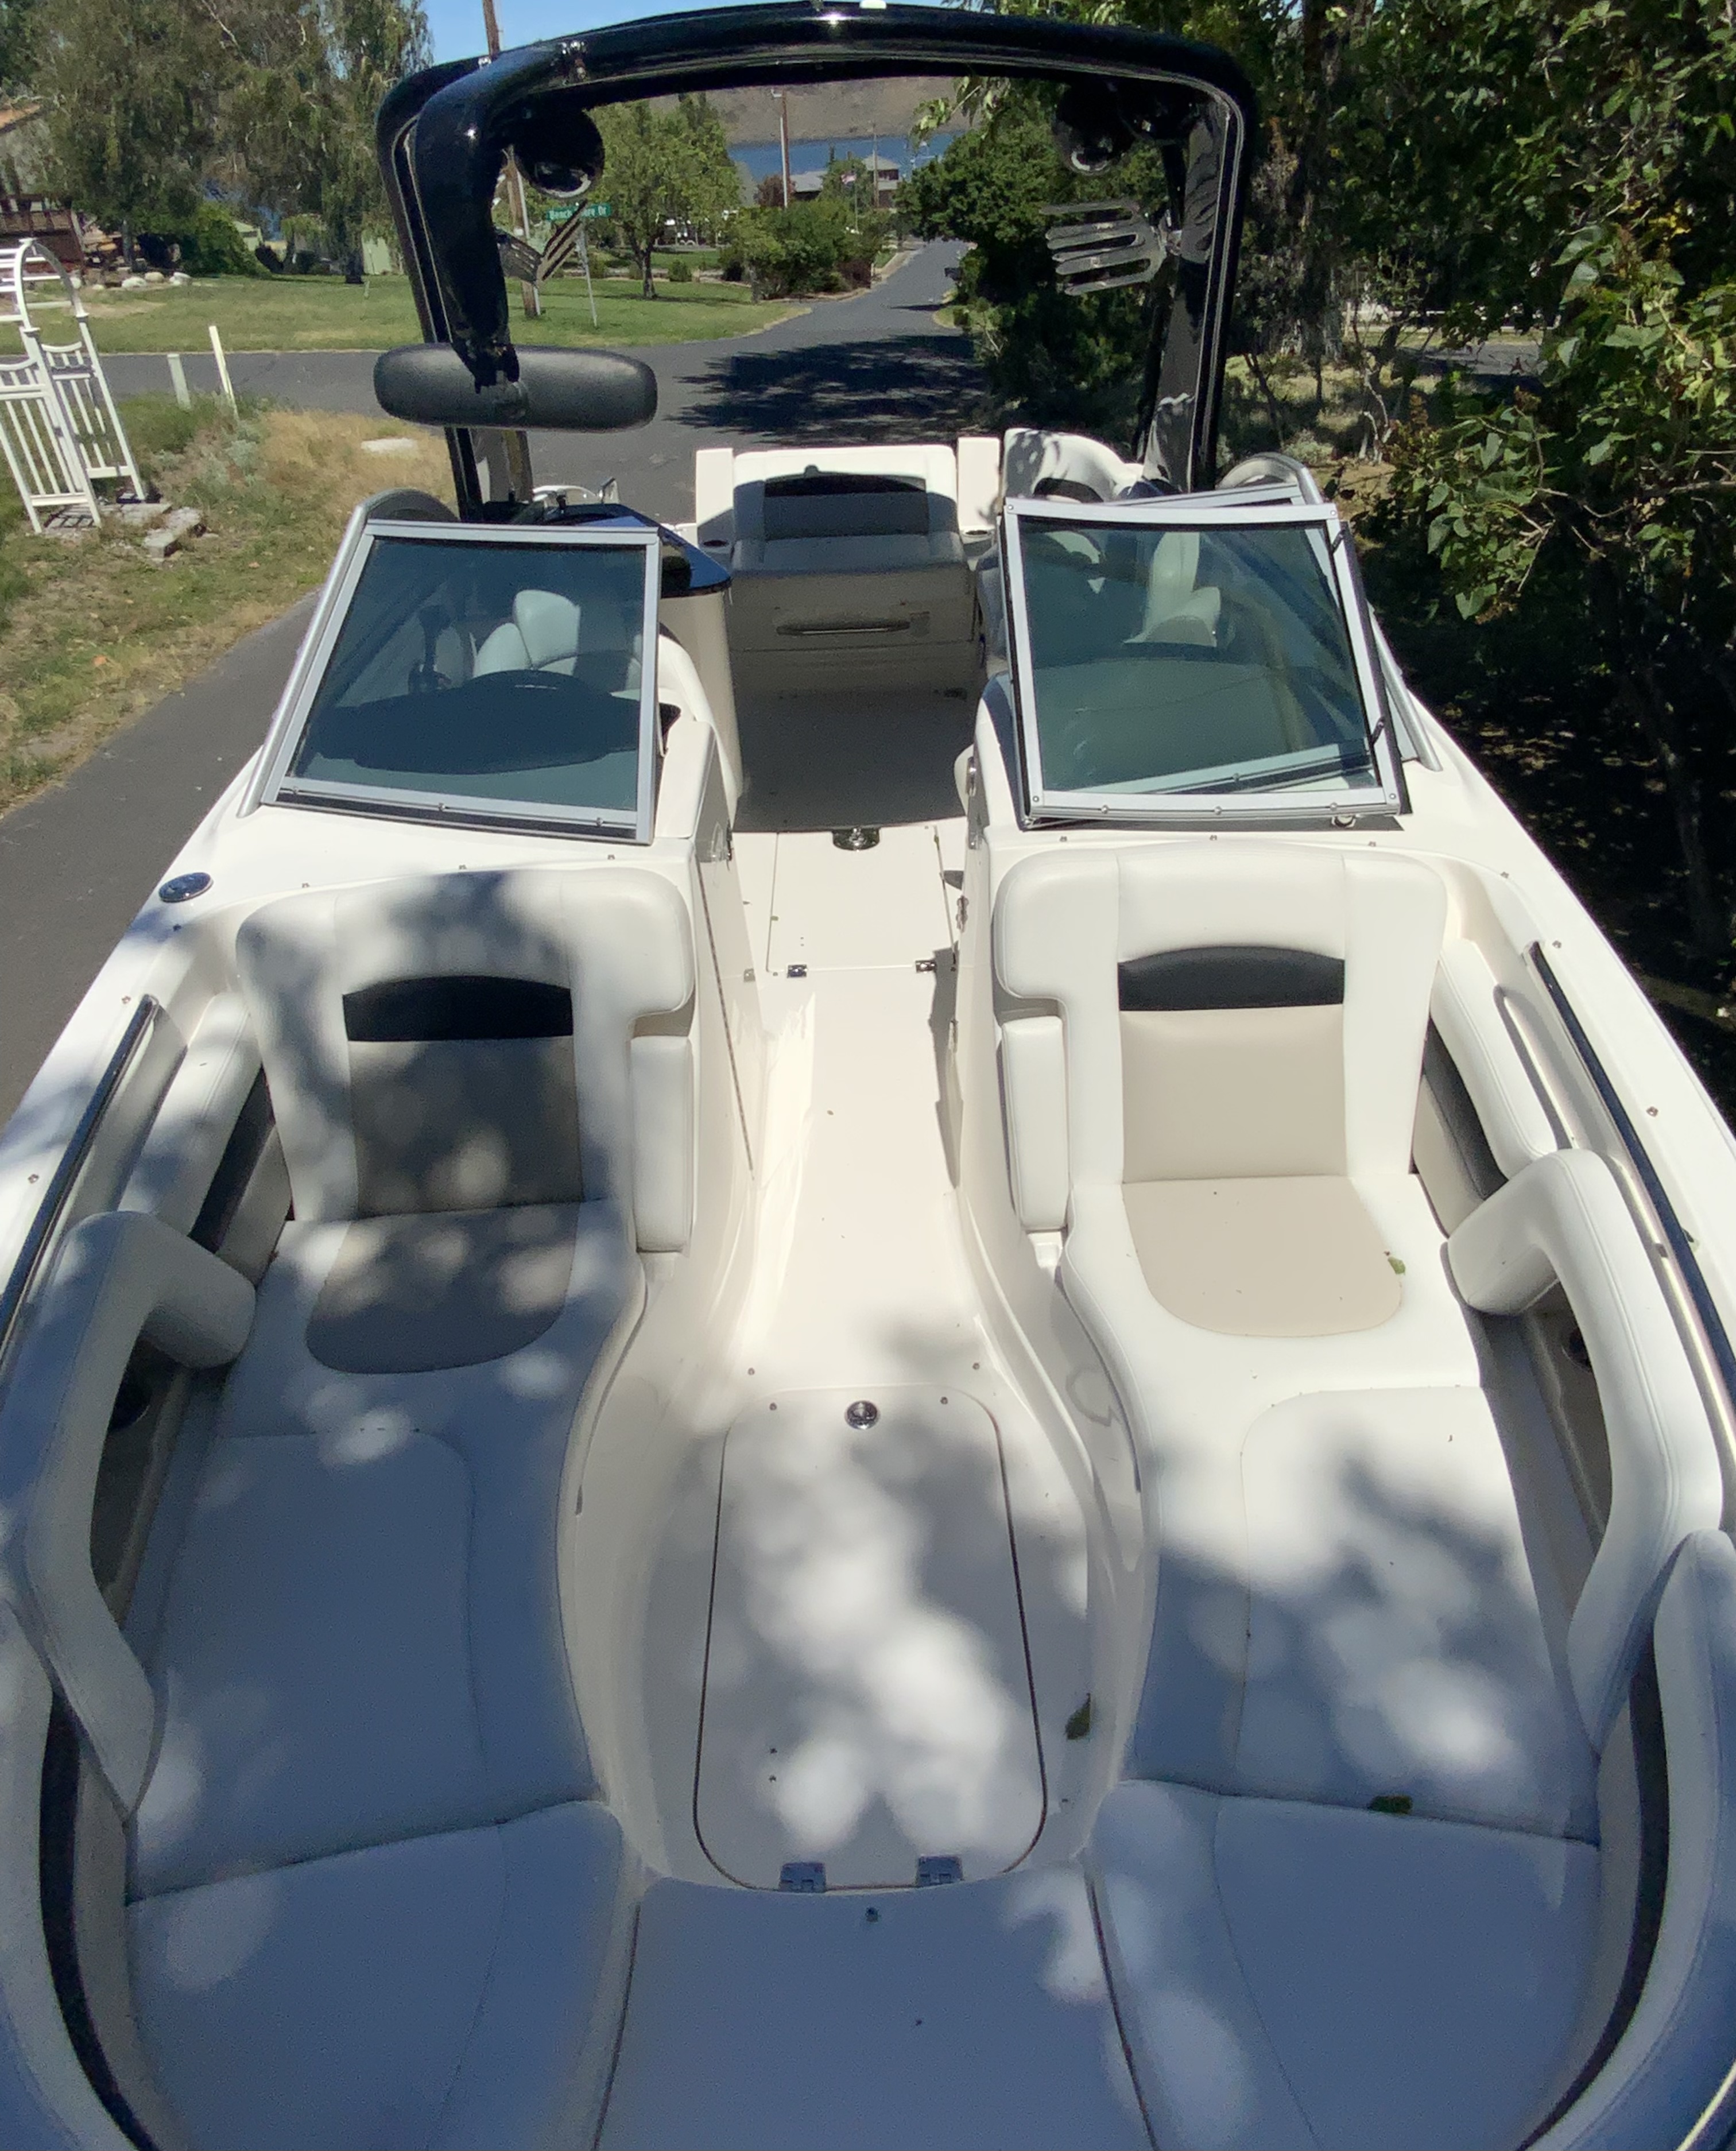 2008 Chaparral 264 Sunesta Power boat for sale in Hermiston, OR - image 7 